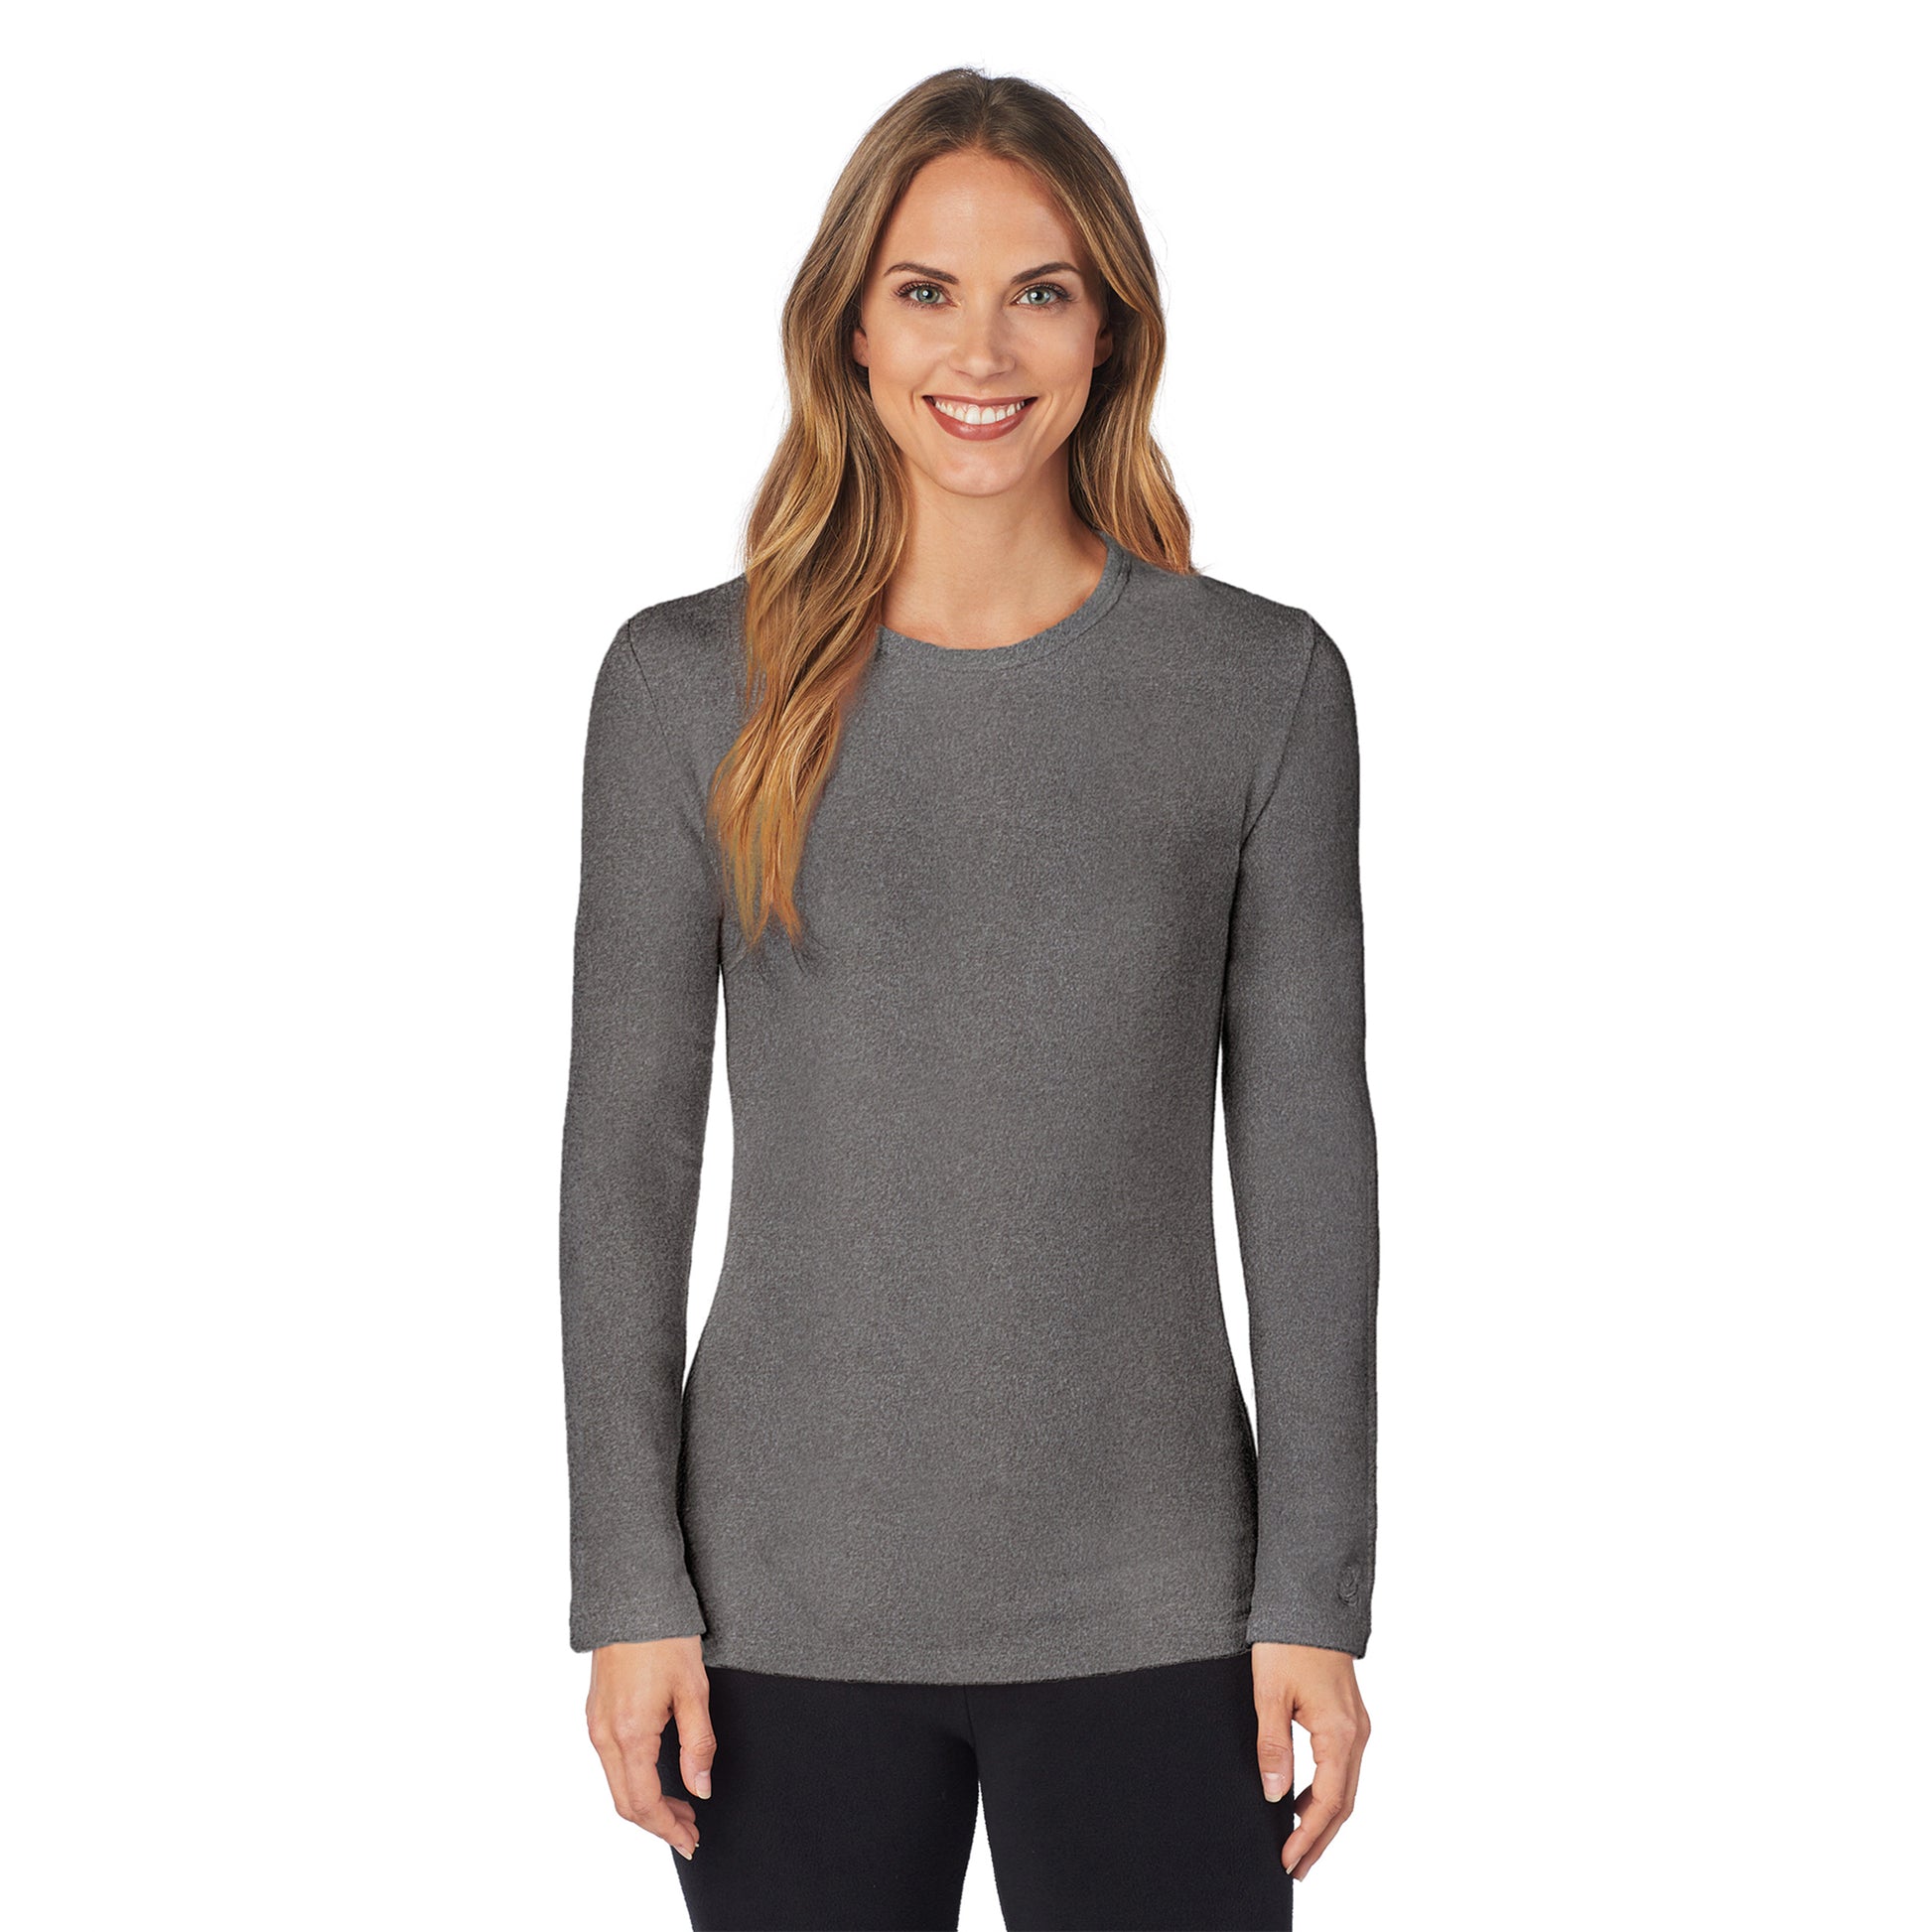 Charcoal Heather; Model is wearing size S. She is 5’9”, Bust 32”, Waist 25.5”, Hips 36”.@upper body of A lady wearing Charcoal Heather Long Sleeve Crew